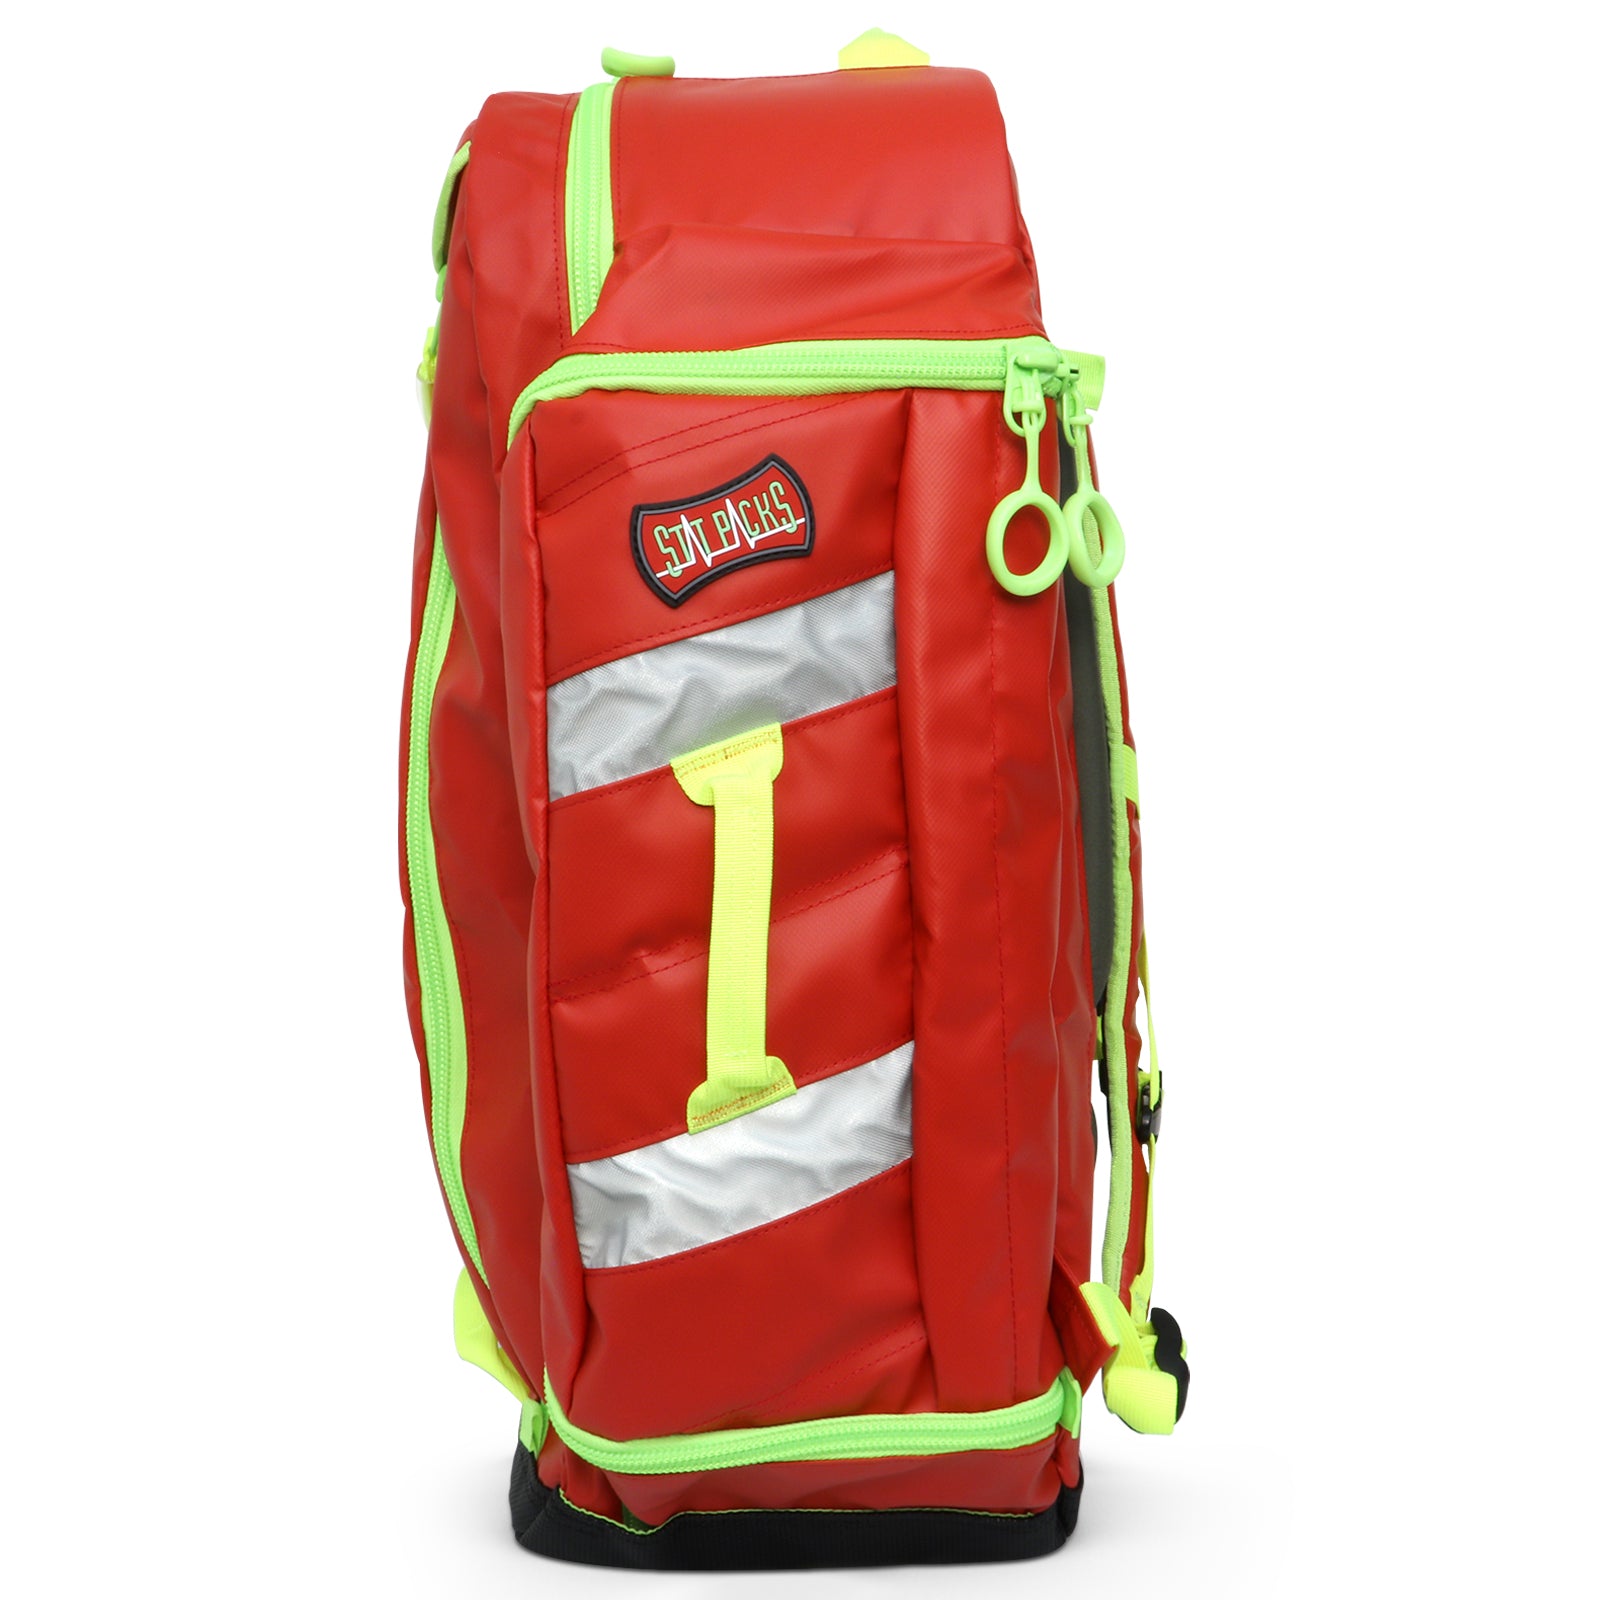 Statpacks G3+ Breather Extra Large Fully Stocked EMT Premium Trauma Bag for Firefighters & First Responders